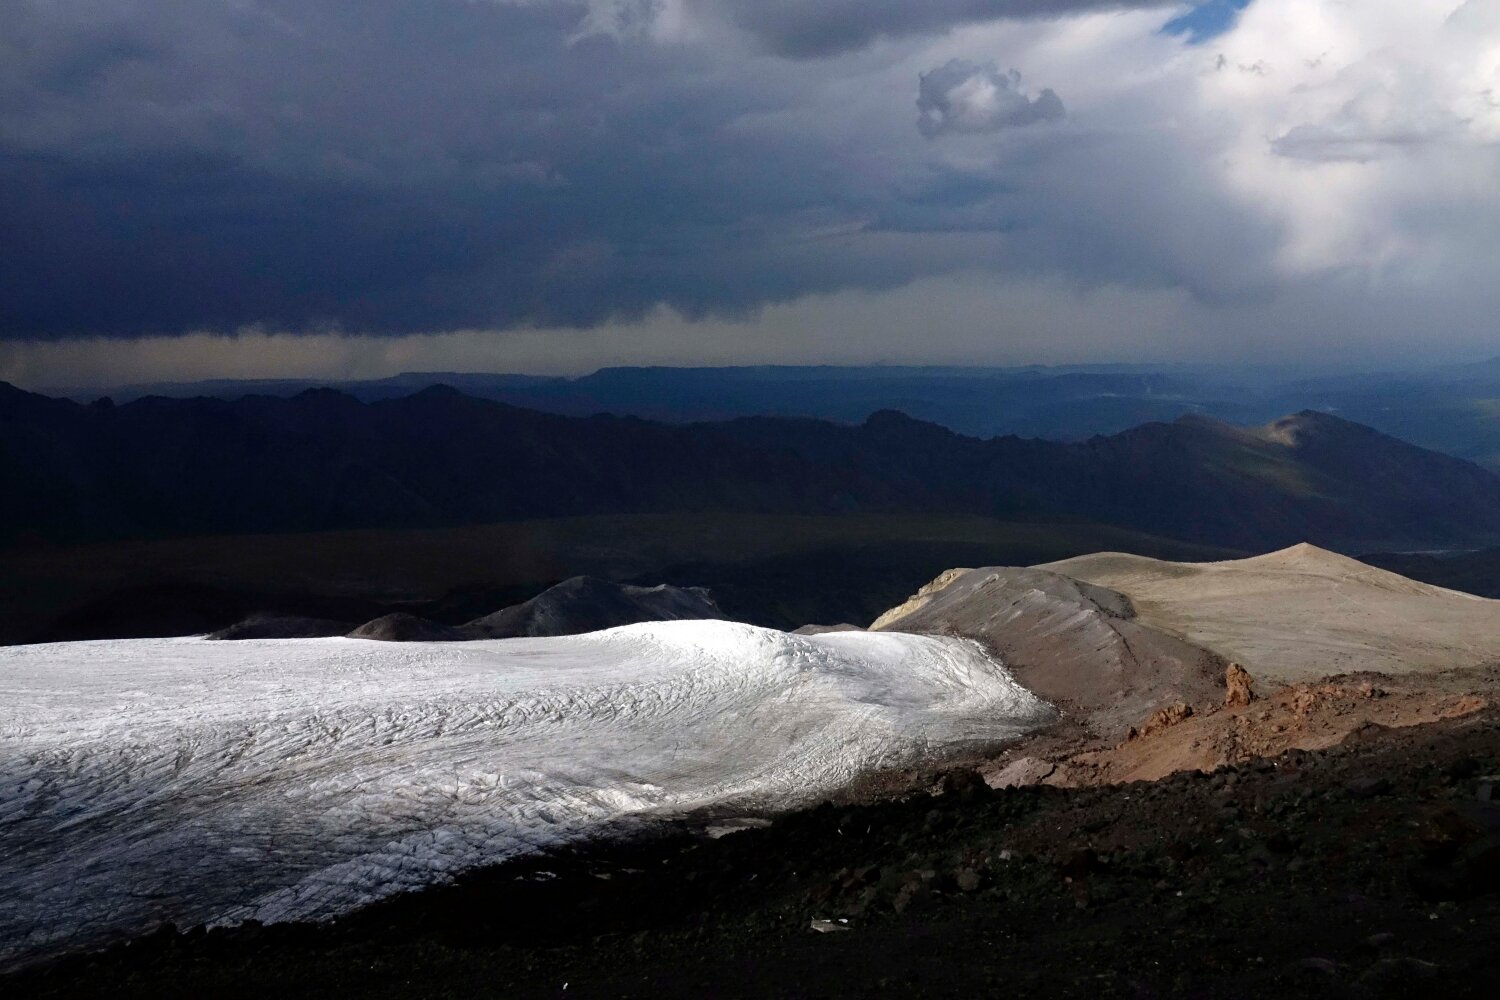 Looking down across Oulloulok glacier towards basecamp in stormy light from high camp at North Hut.